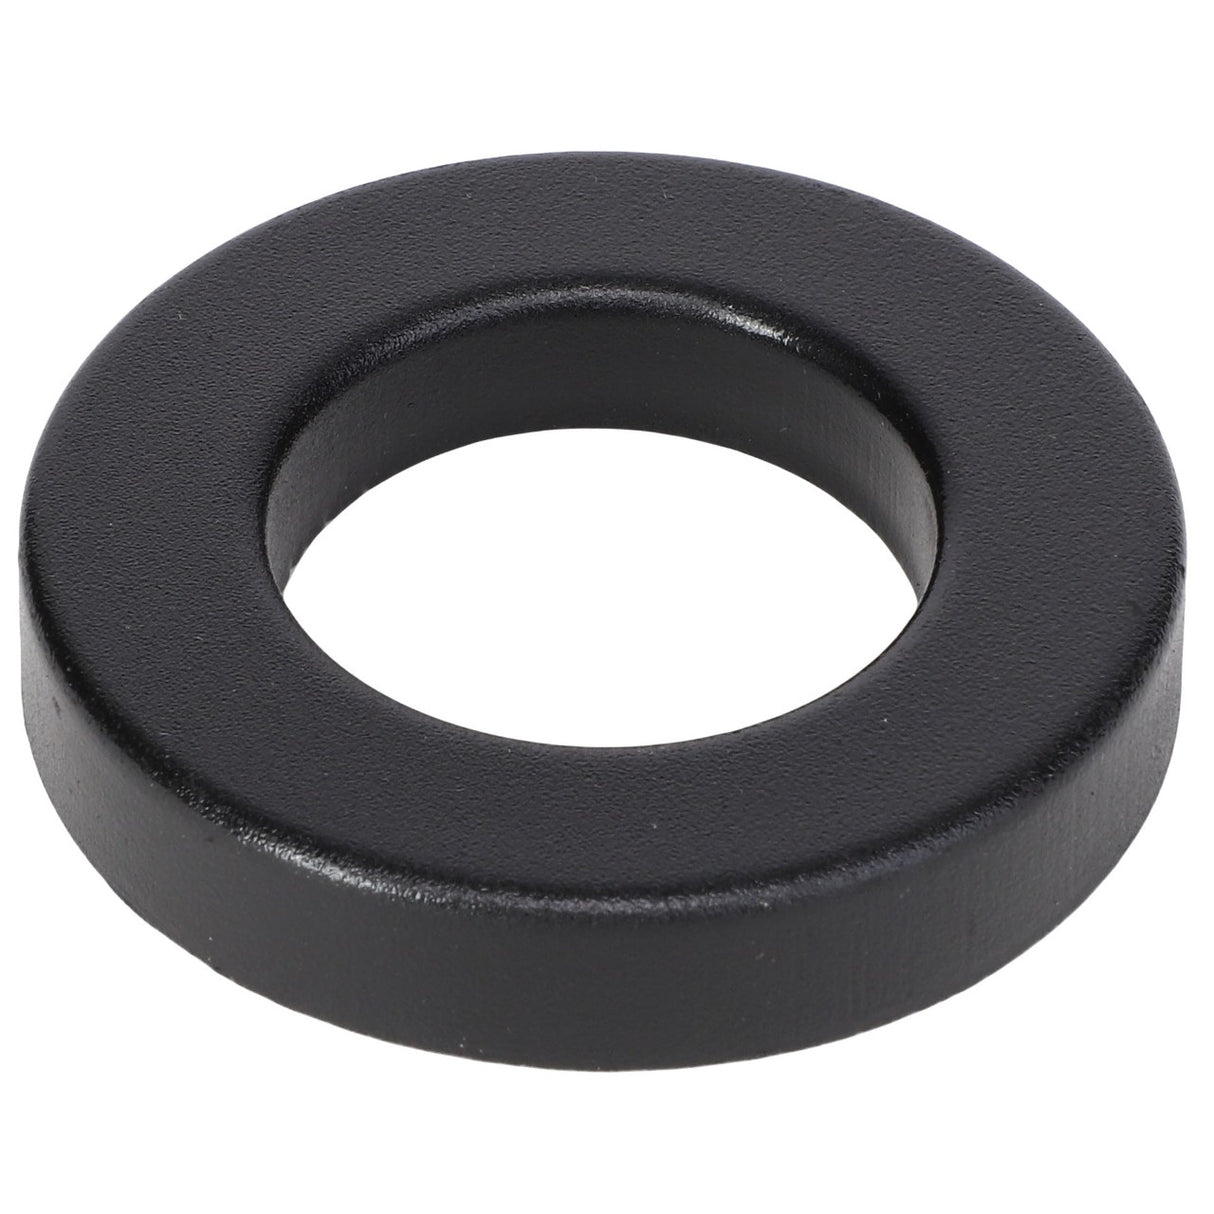 AGCO | Outer Ring - Acp0143000 - Farming Parts